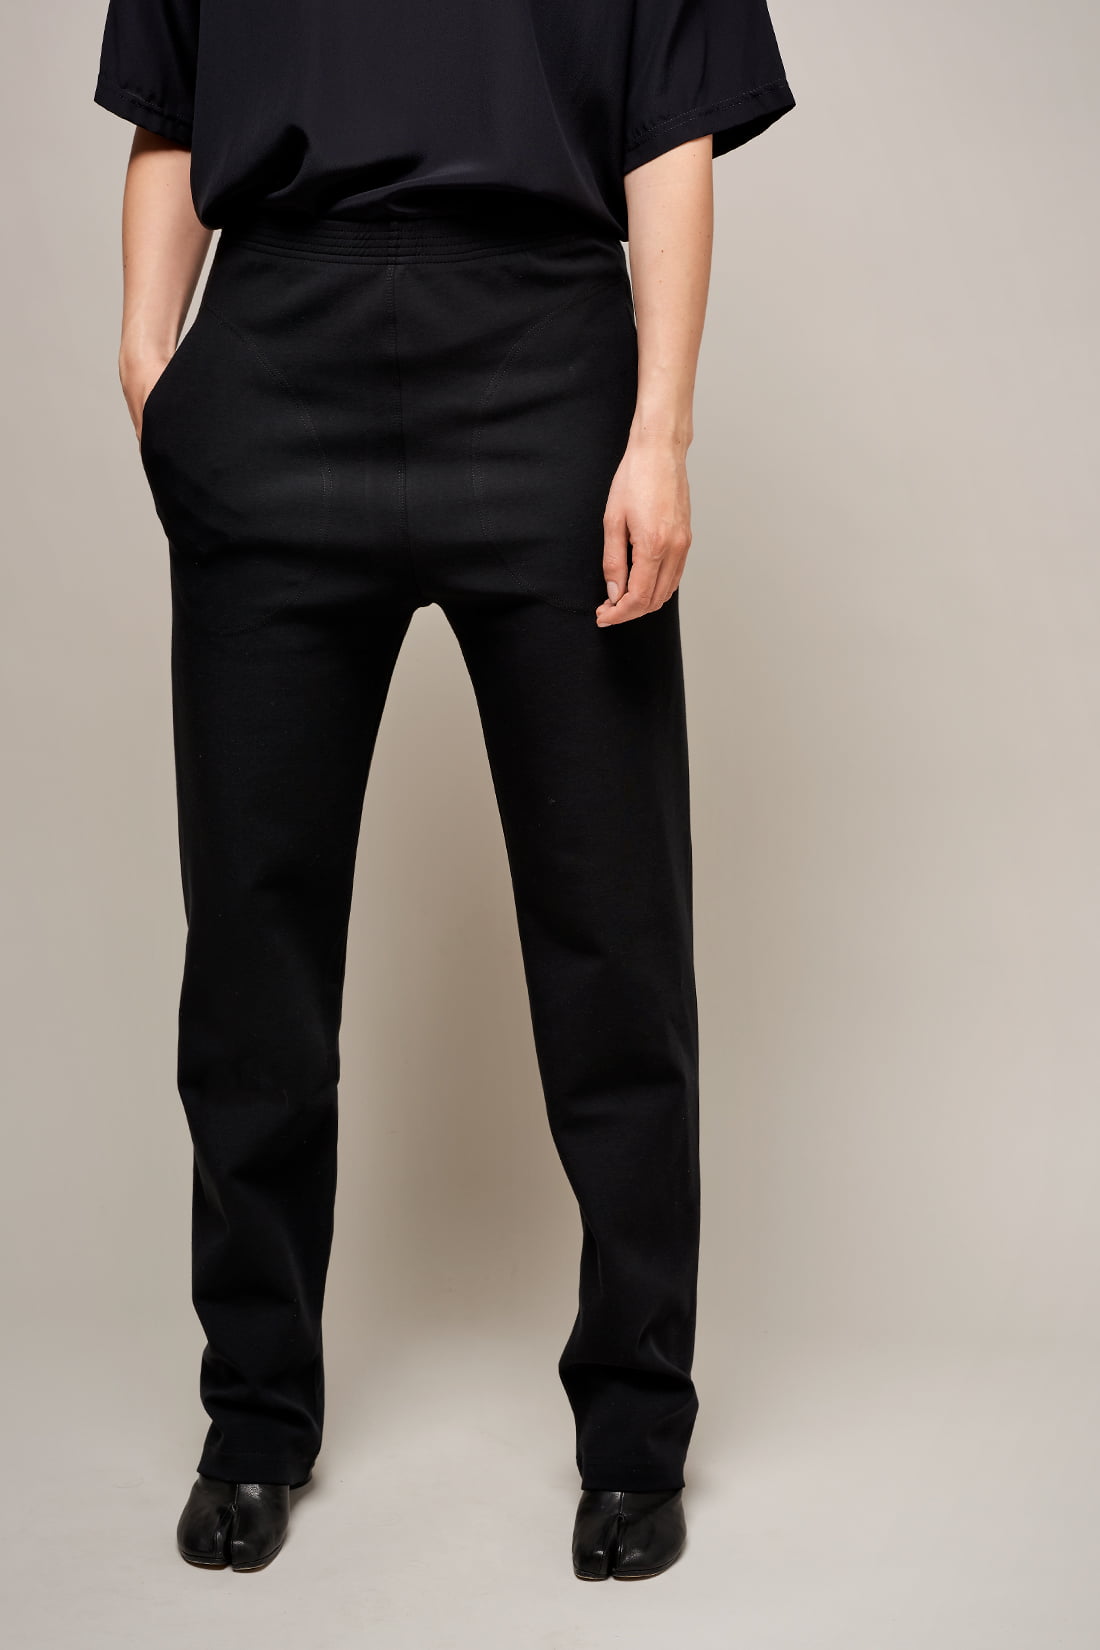 trousers Relax black lycra